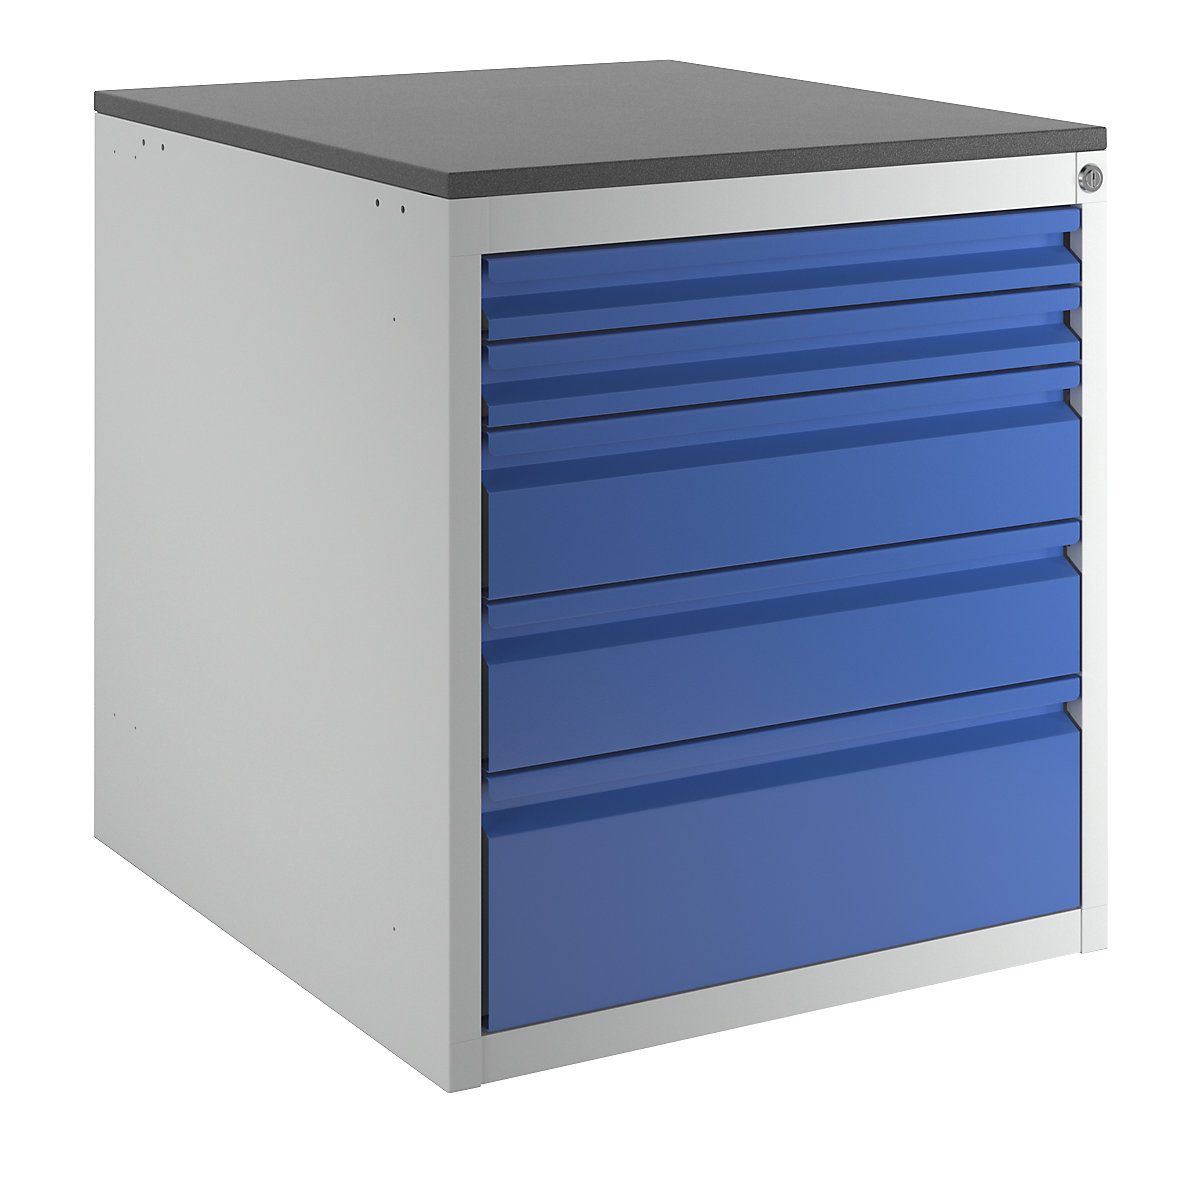 Drawer cupboard with telescopic guides – RAU, height 640 mm, drawers: 2 x 60, 2 x 120, 1 x 180 mm, light grey / gentian blue, width 580 mm-7